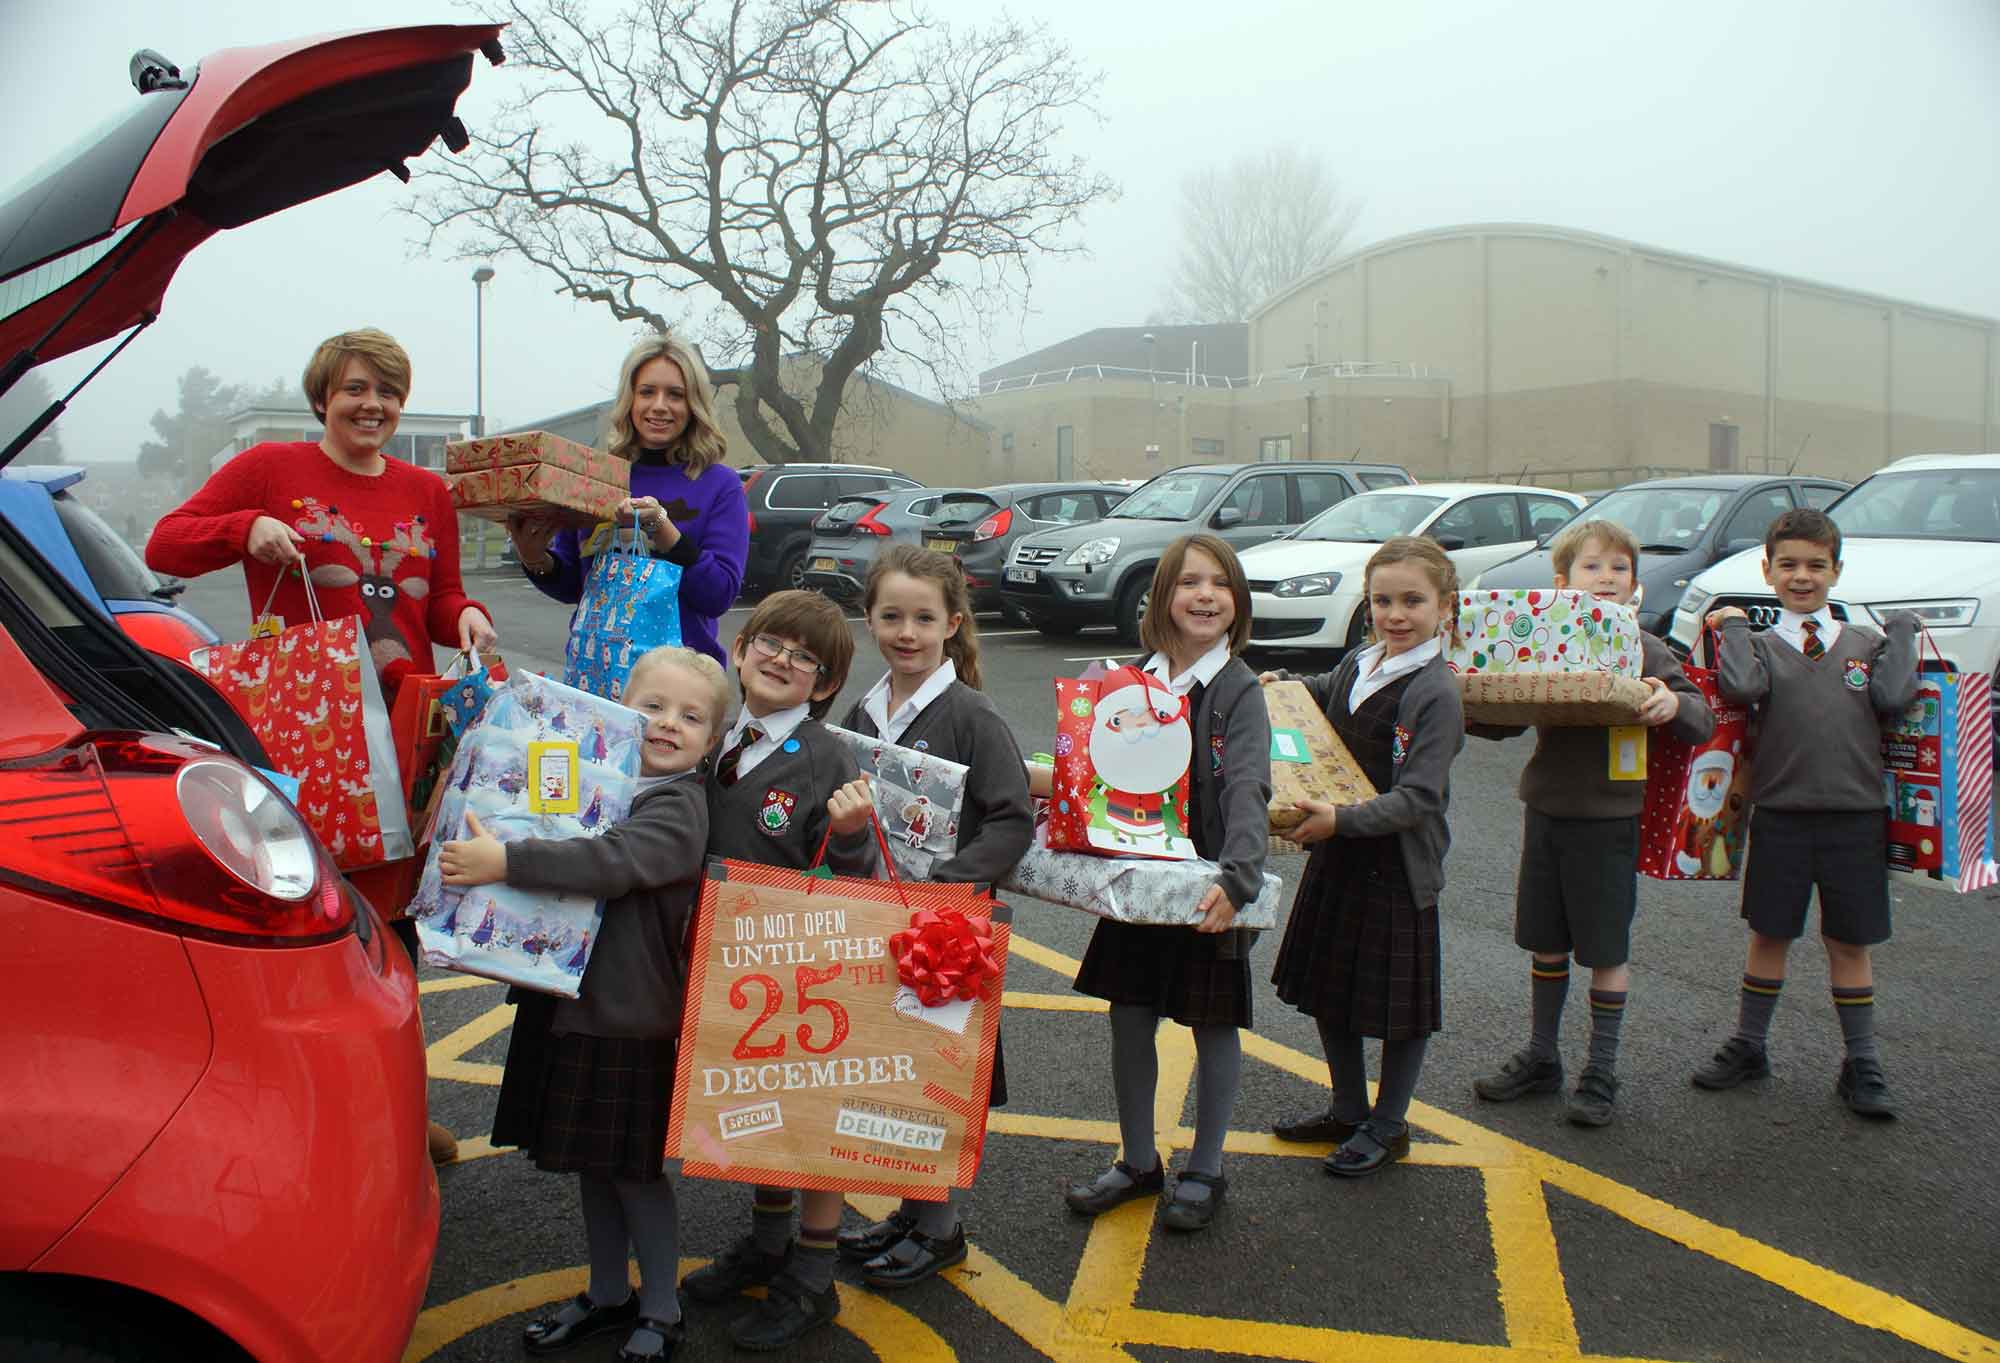 It’s A Wrap! Young Carers Hetty Flynn and Laura Winfield gratefully accept gifts from Ashville Pre-Prep School pupils